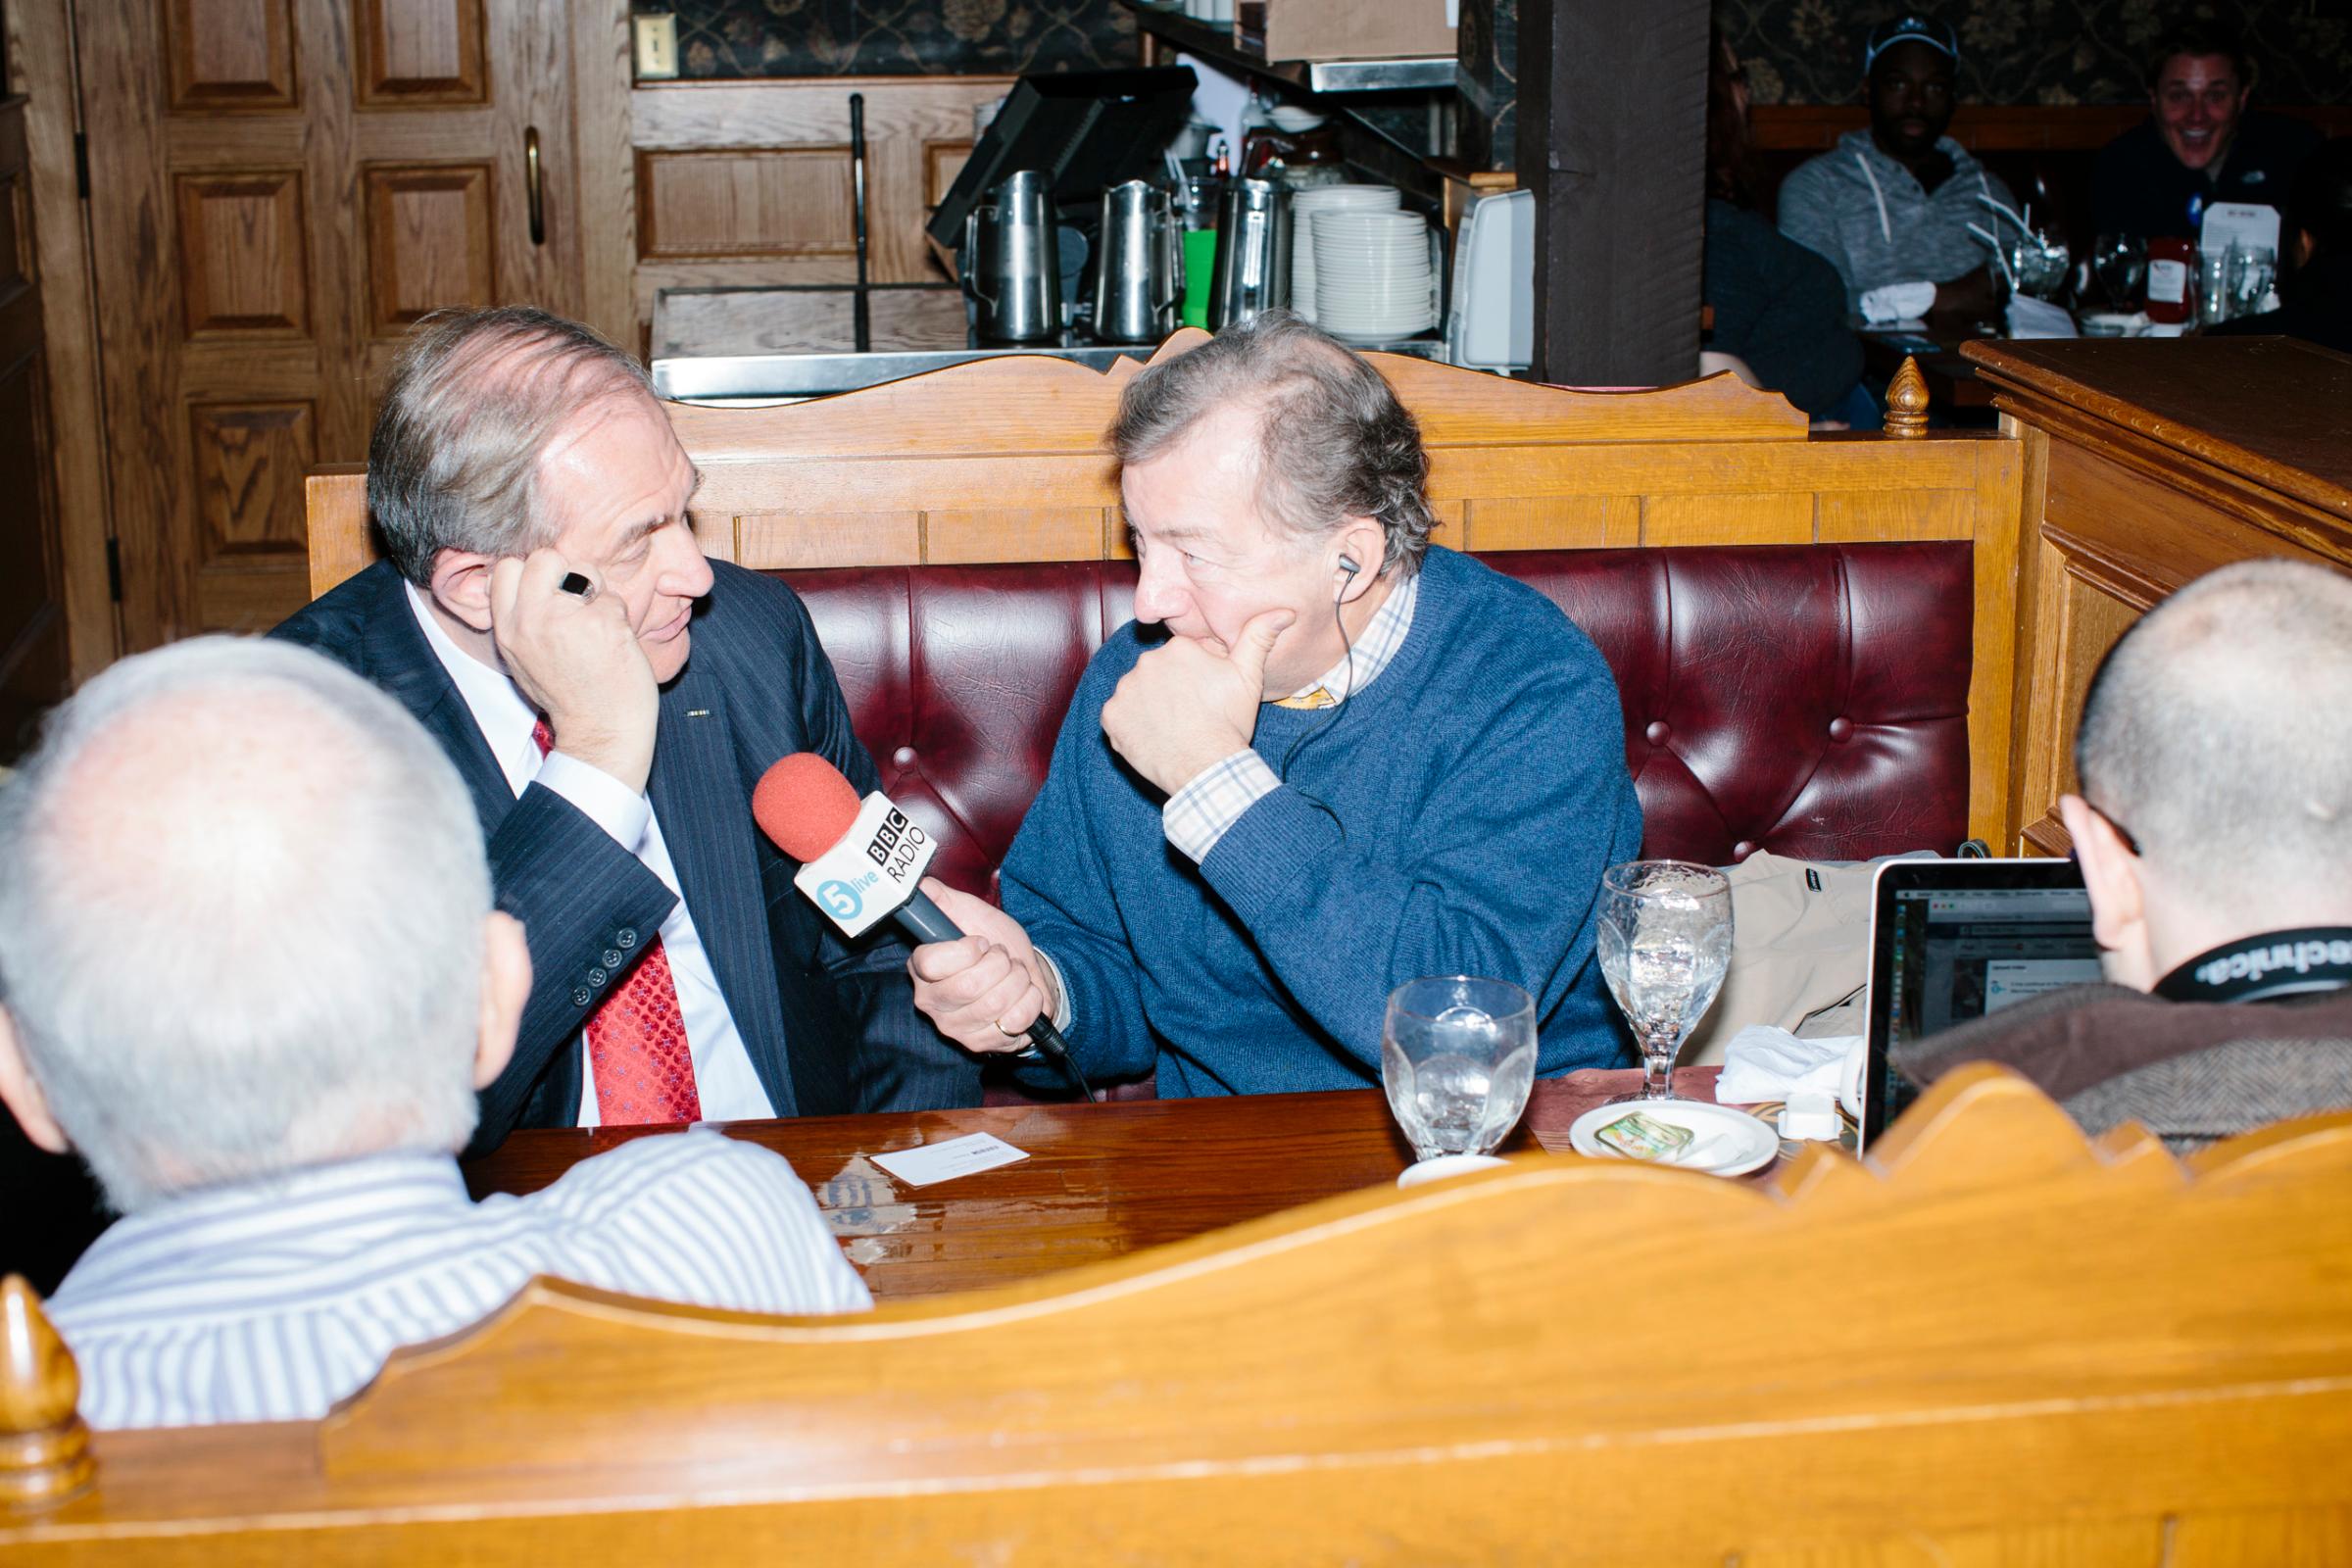 BBC 5 reporter Rhod Sharp interviews former Virginia governor and Republican presidential candidate Jim Gilmore before he gets lunch at the Puritan Backroom on the day of primary voting, Feb. 9, 2016. Sharp's radio program is called "Up All Night." The Puritan Backroom is a long-time favorite stop of political candidates in the state and place where journalists and political junkies hang out on election days hoping to meet candidates. Gilmore finished in last place among major Republican candidates still in the race with a total of 150 votes.